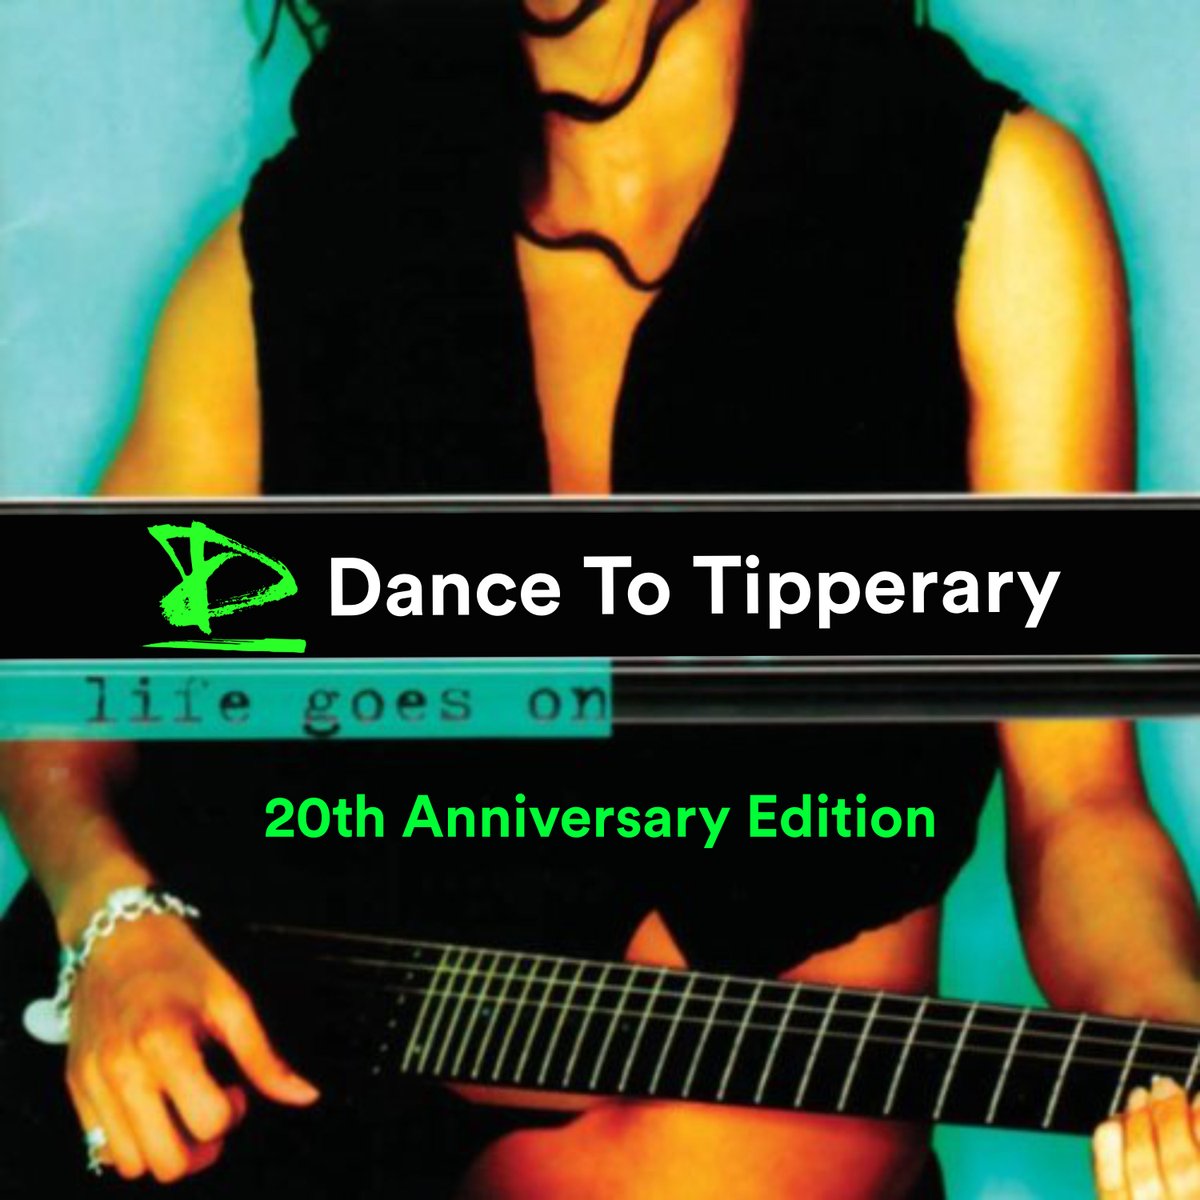 Dance To Tipperary announce 20th Anniversary Edition Life Goes On album and two single releases. #IrishMusic #NewRelease dancetotipperary.ie/post/life-goes…